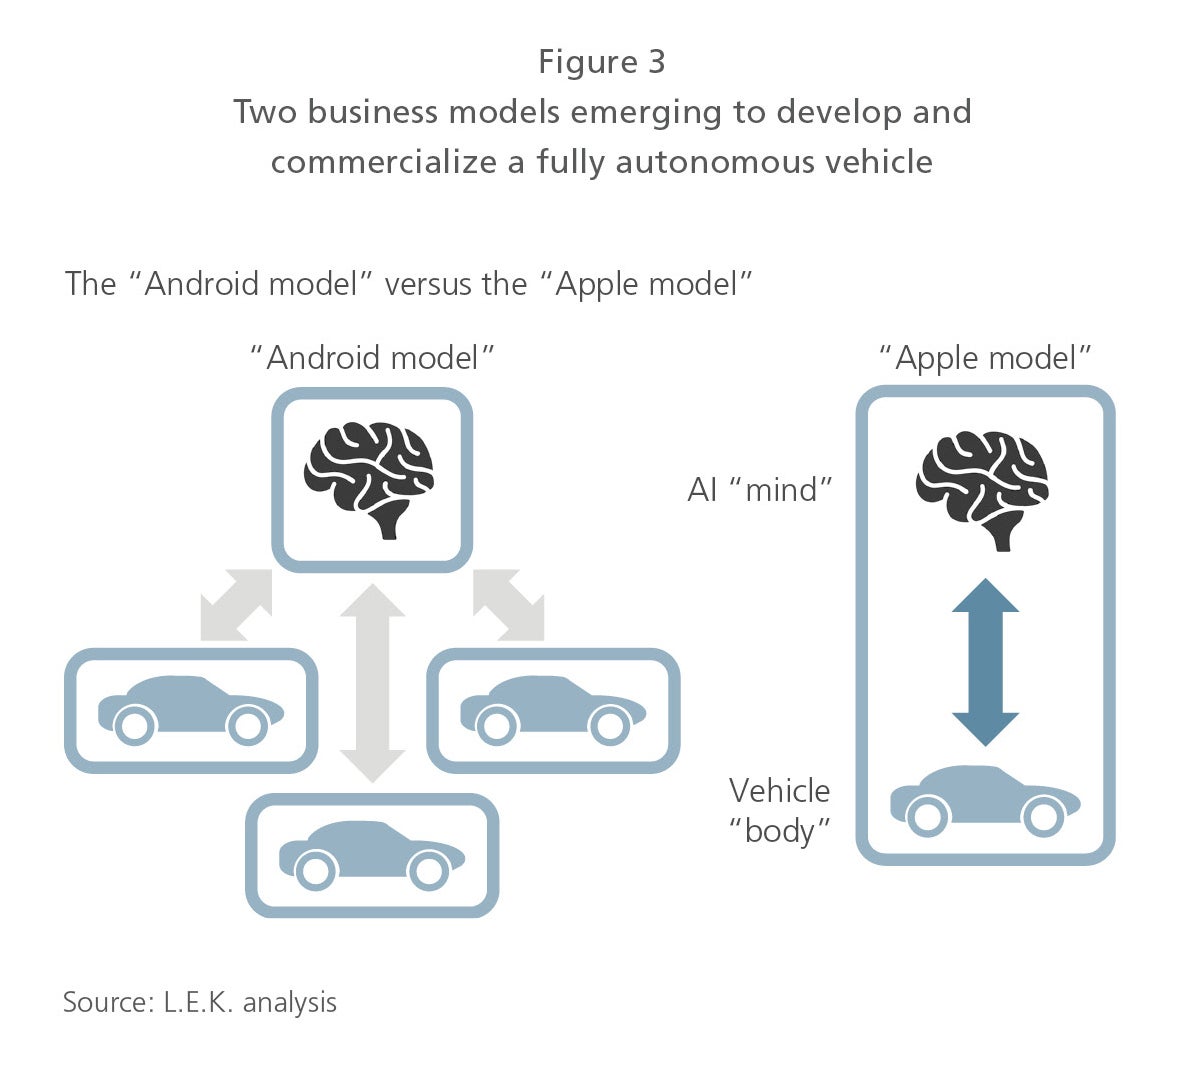 Two business models emerging to develop and commercialize a fully autonomous vehicle